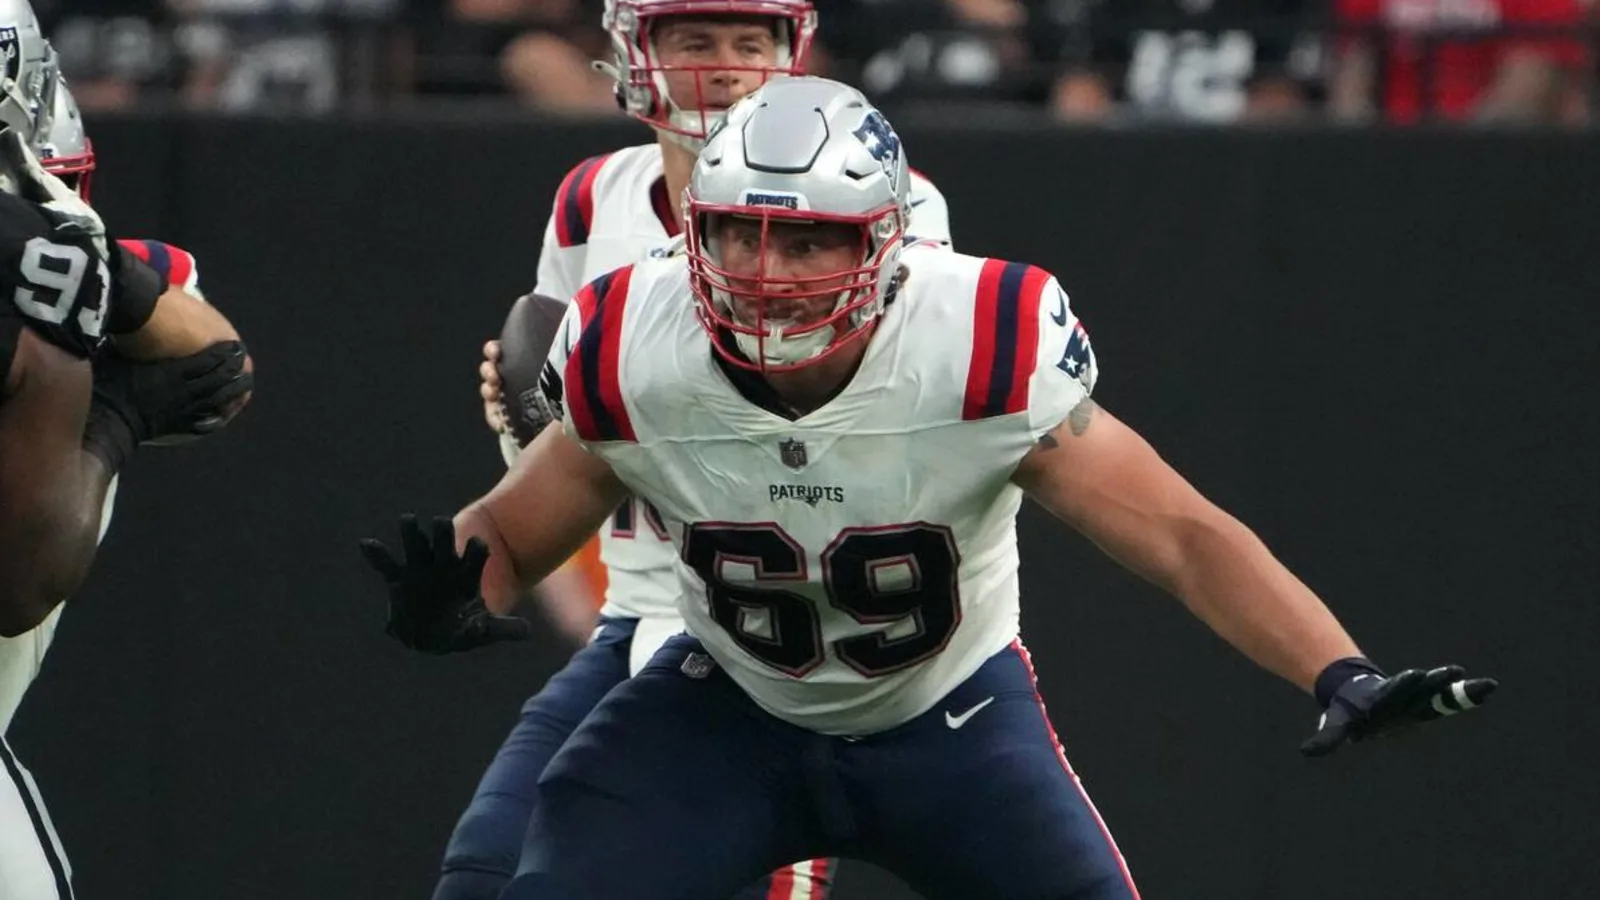 Turmoil in Foxborough New England Patriots Face Early Setback with Cole Strange's Injury